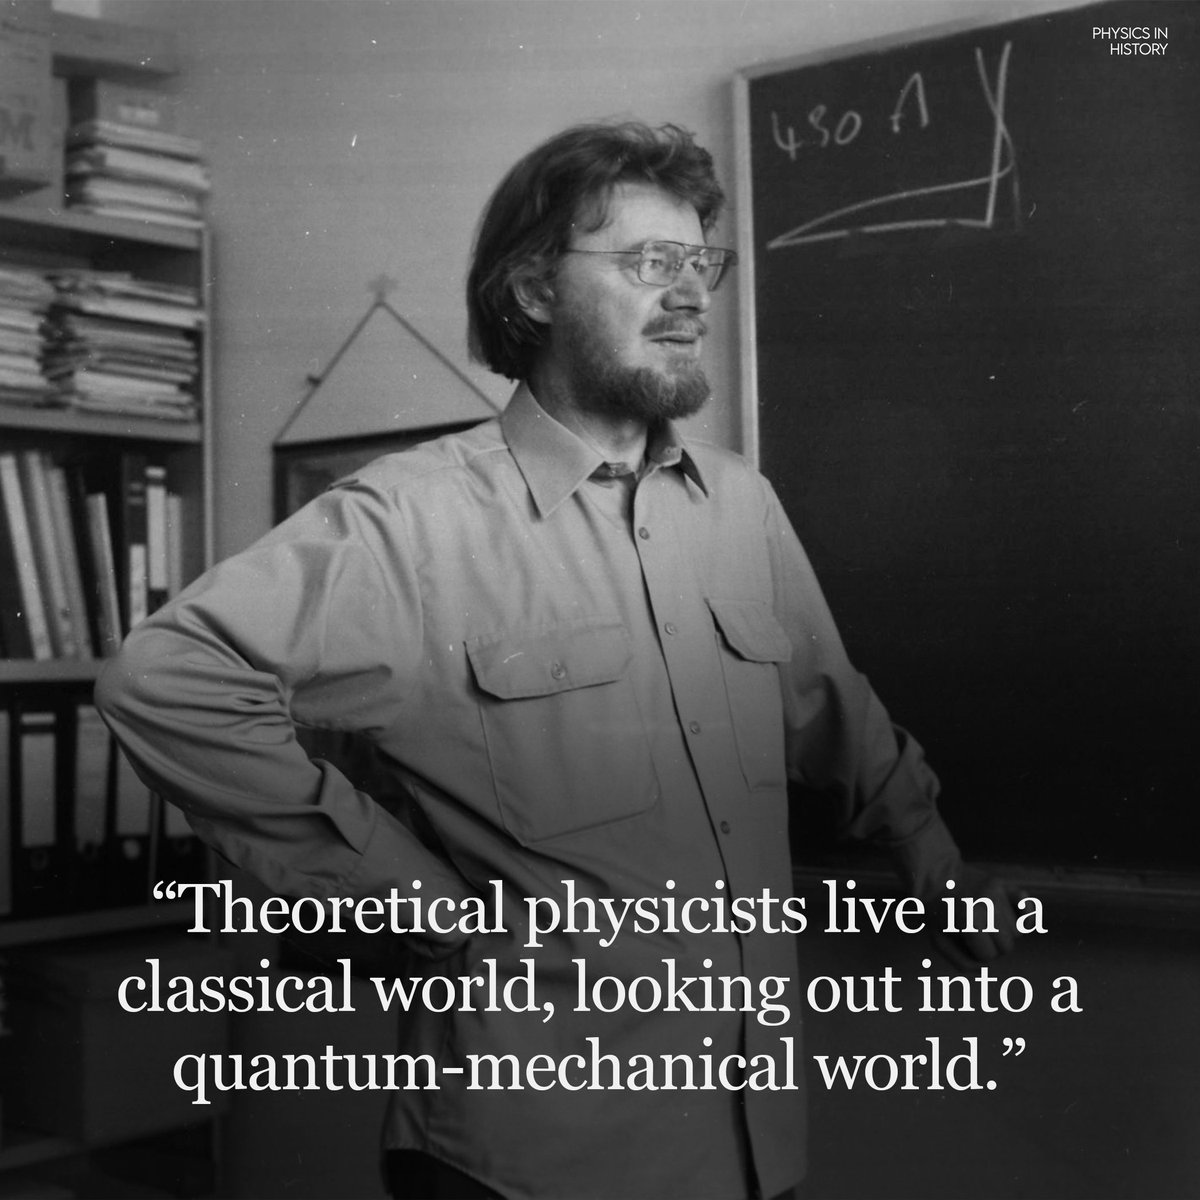 Theoretical physicists live in a classical world, looking out into a quantum-mechanical world. The latter we describe only subjectively, in terms of procedures and results in our classical domain. - John S. Bell